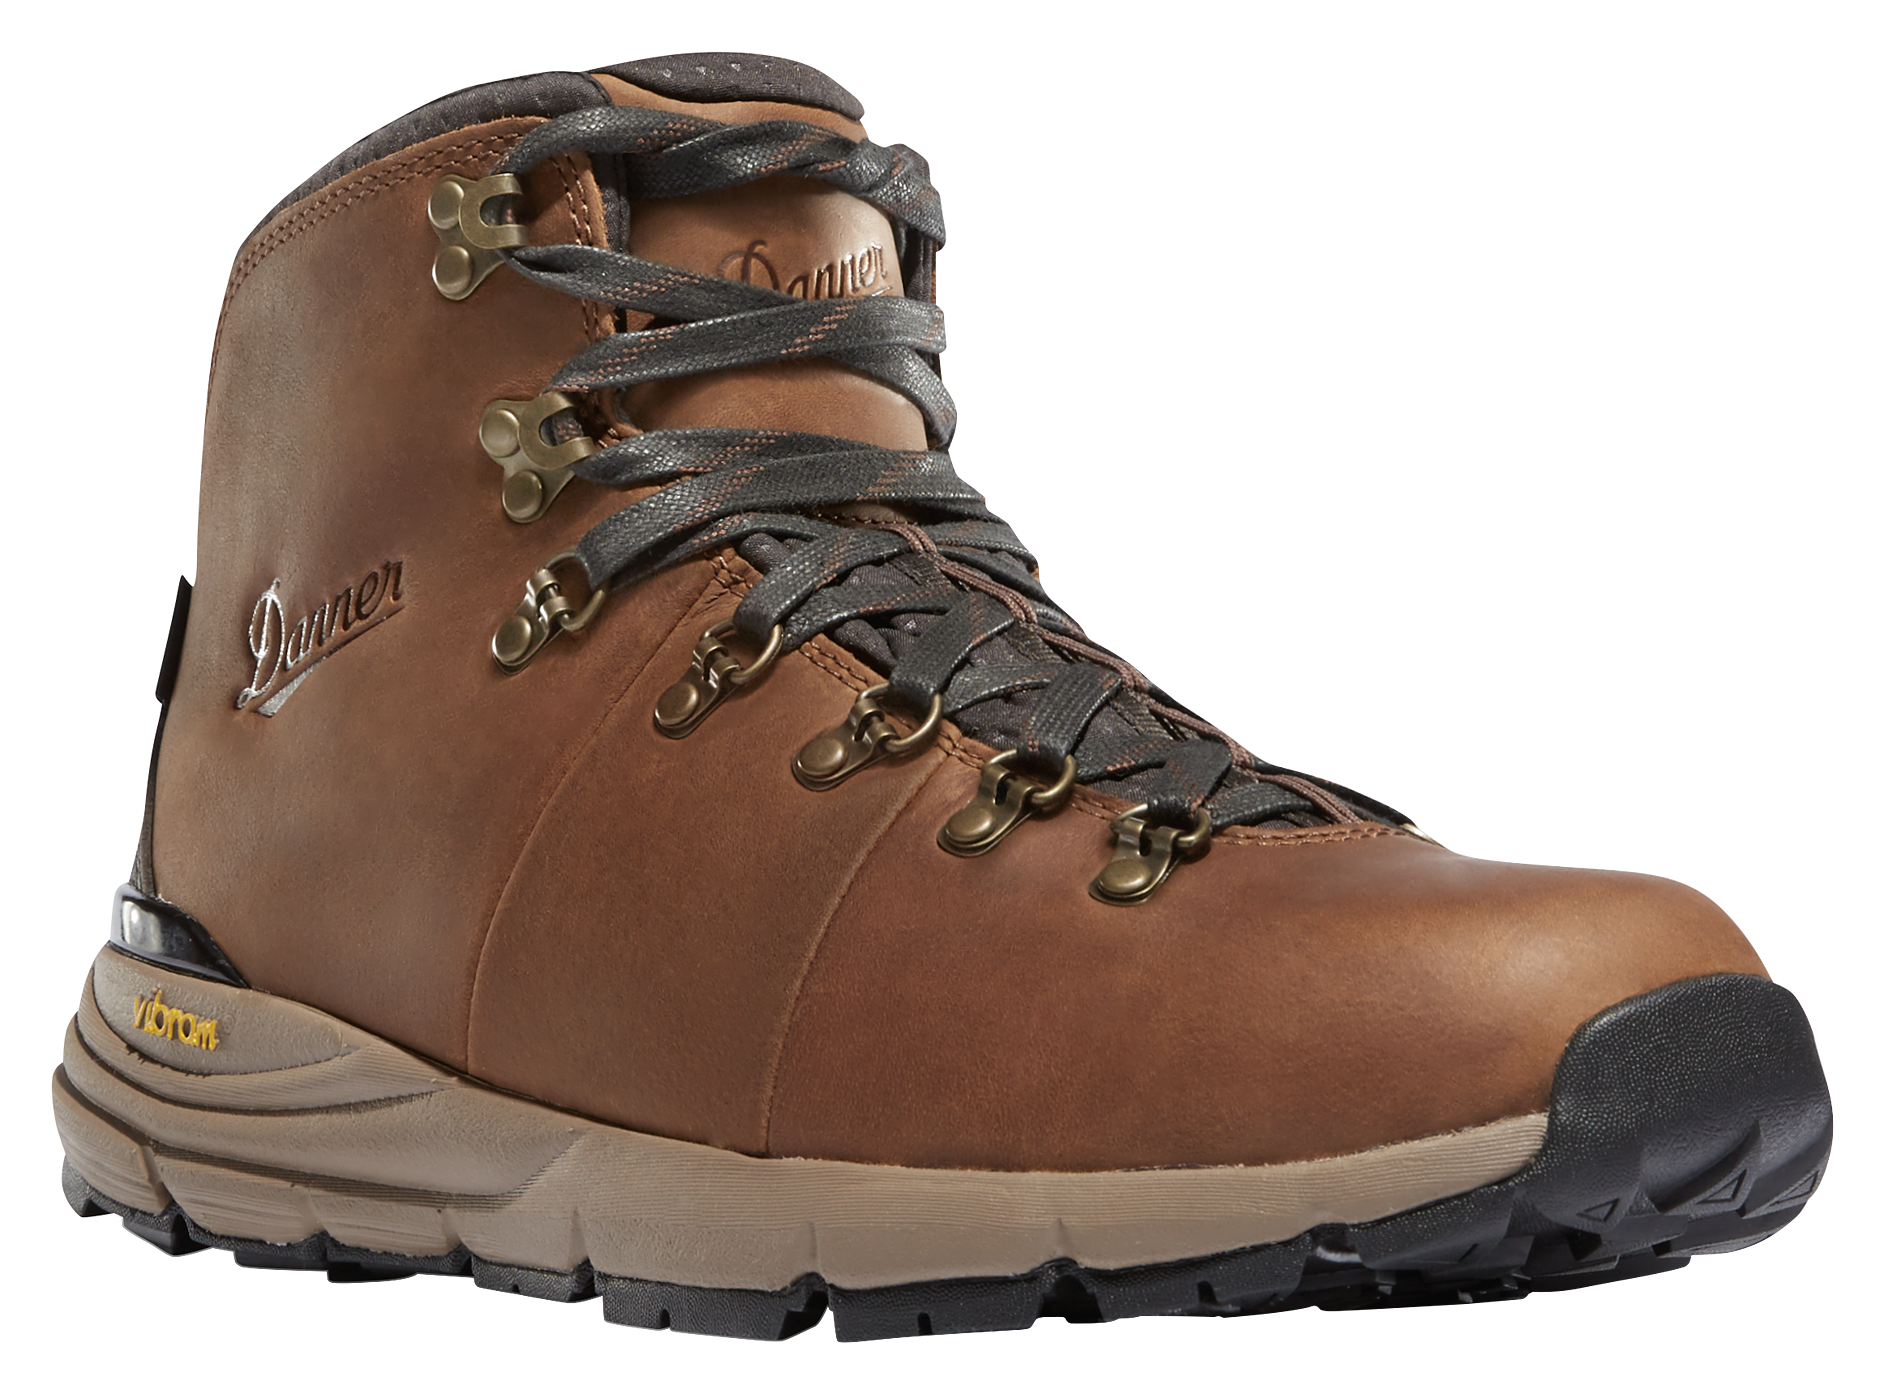 Danner Mountain 600 Waterproof Hiking Boots for Men - Rich Brown - 9M